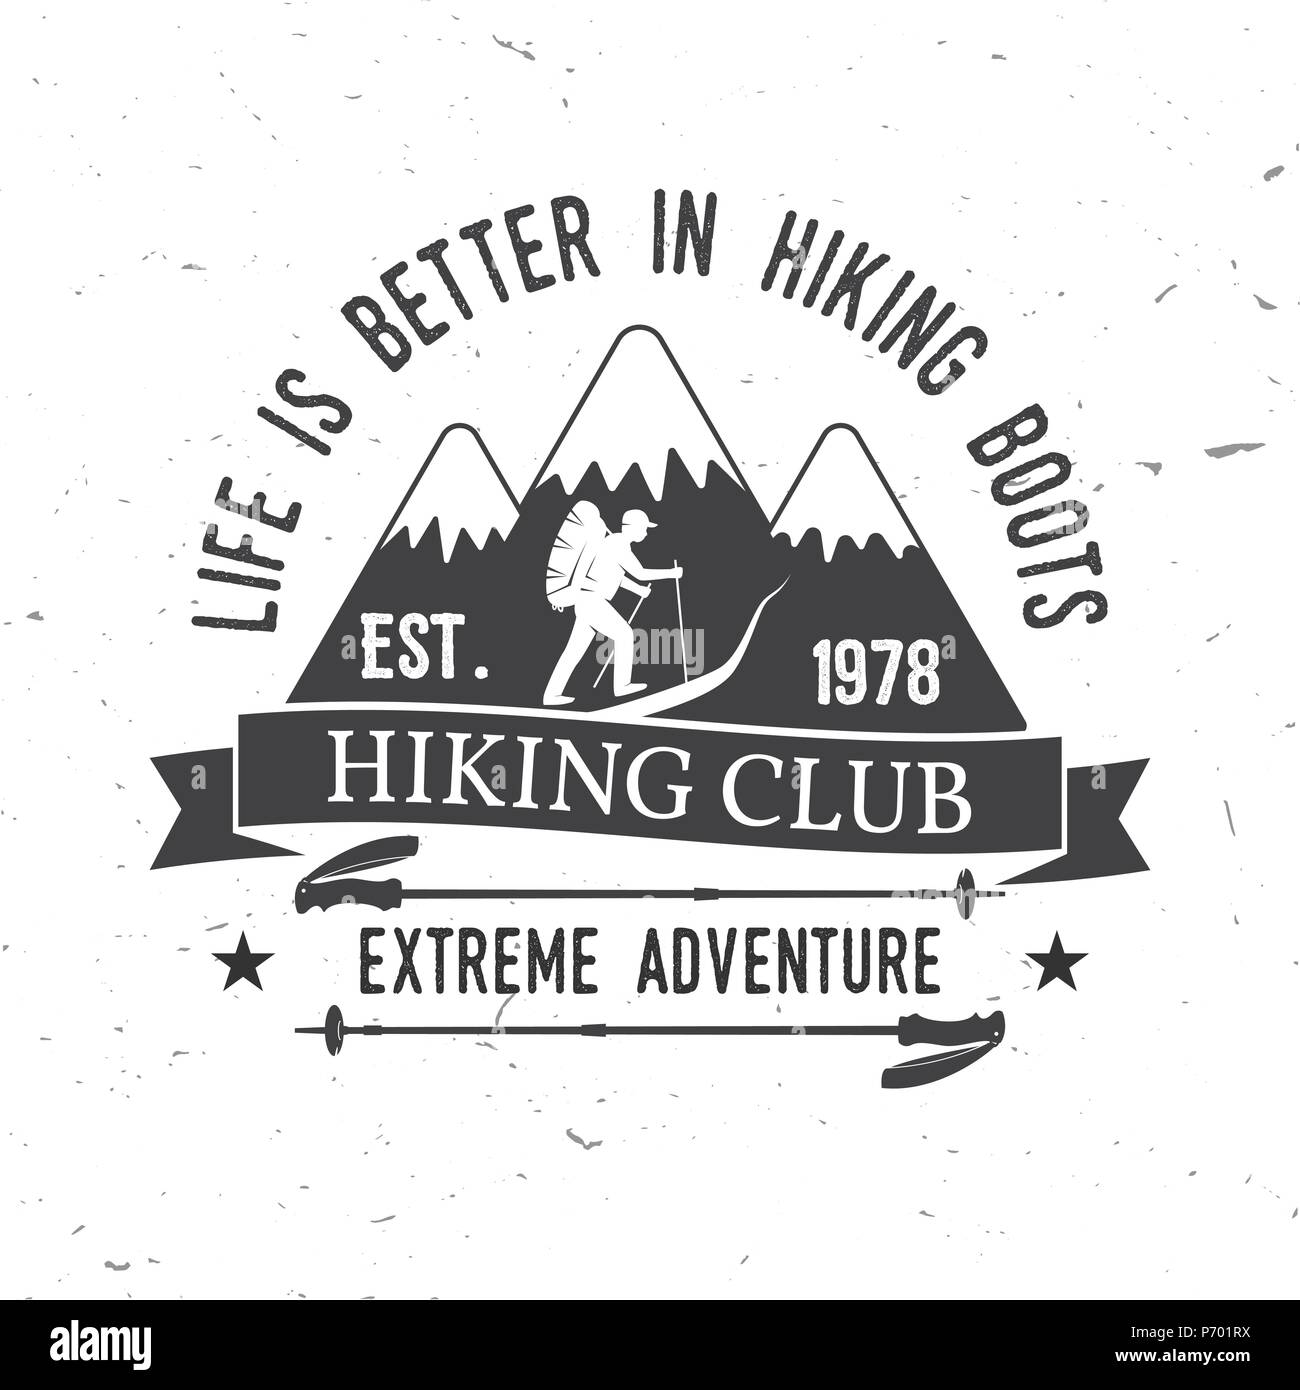 Life is better in hiking boots. Hiking club. Mountains related typographic quote. Vector illustration. Concept for shirt or logo, print, stamp. Stock Vector